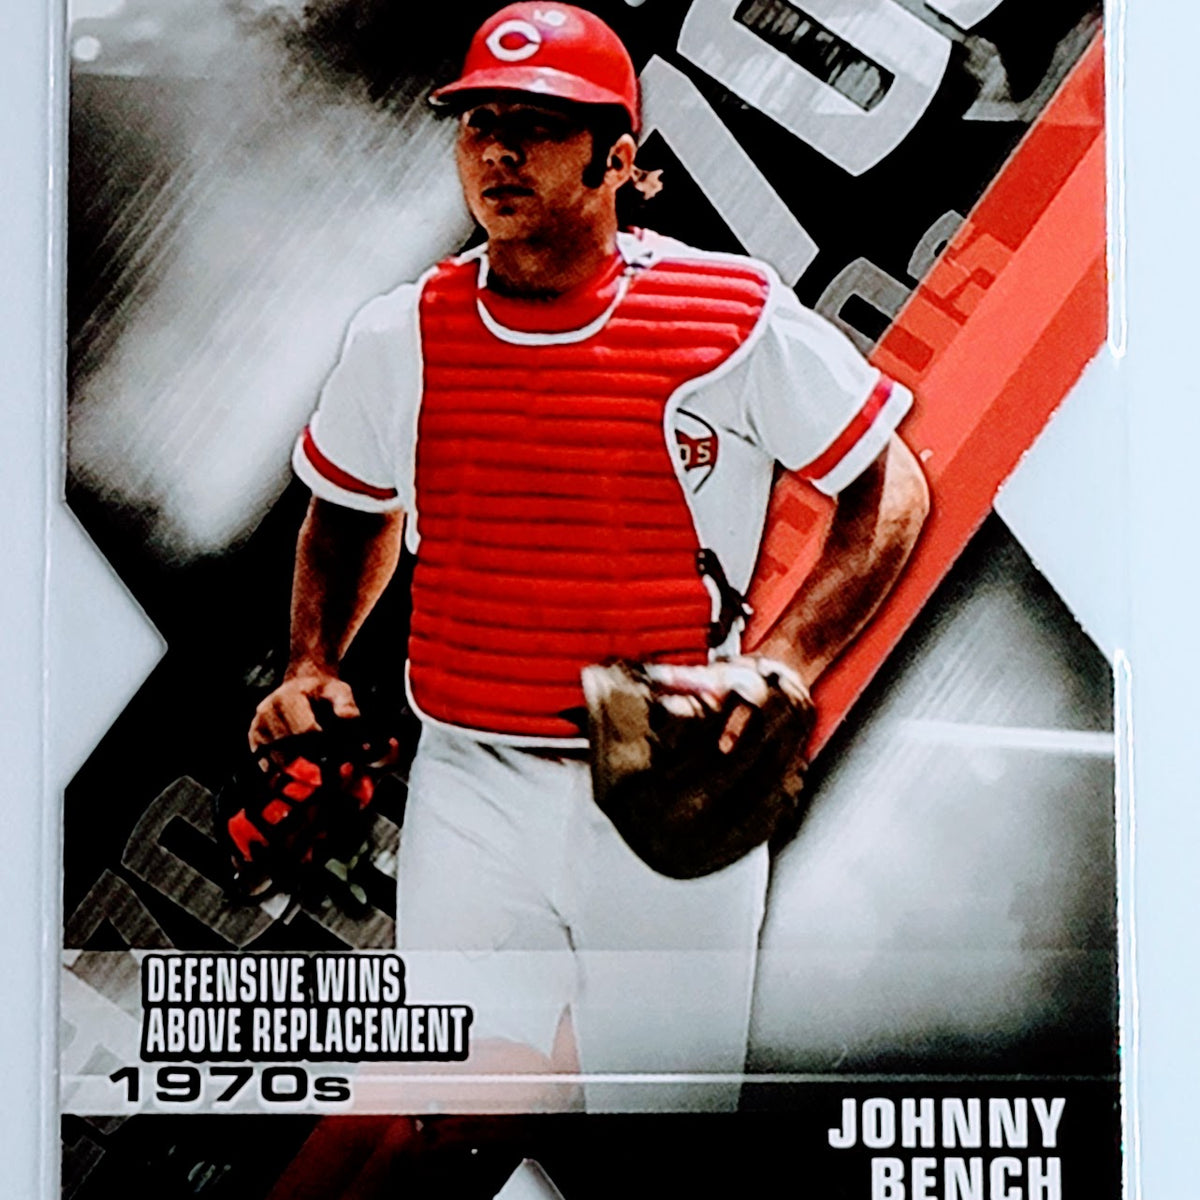 2020 Topps Johnny Bench Decade, of Dominance Baseball Card TH13C